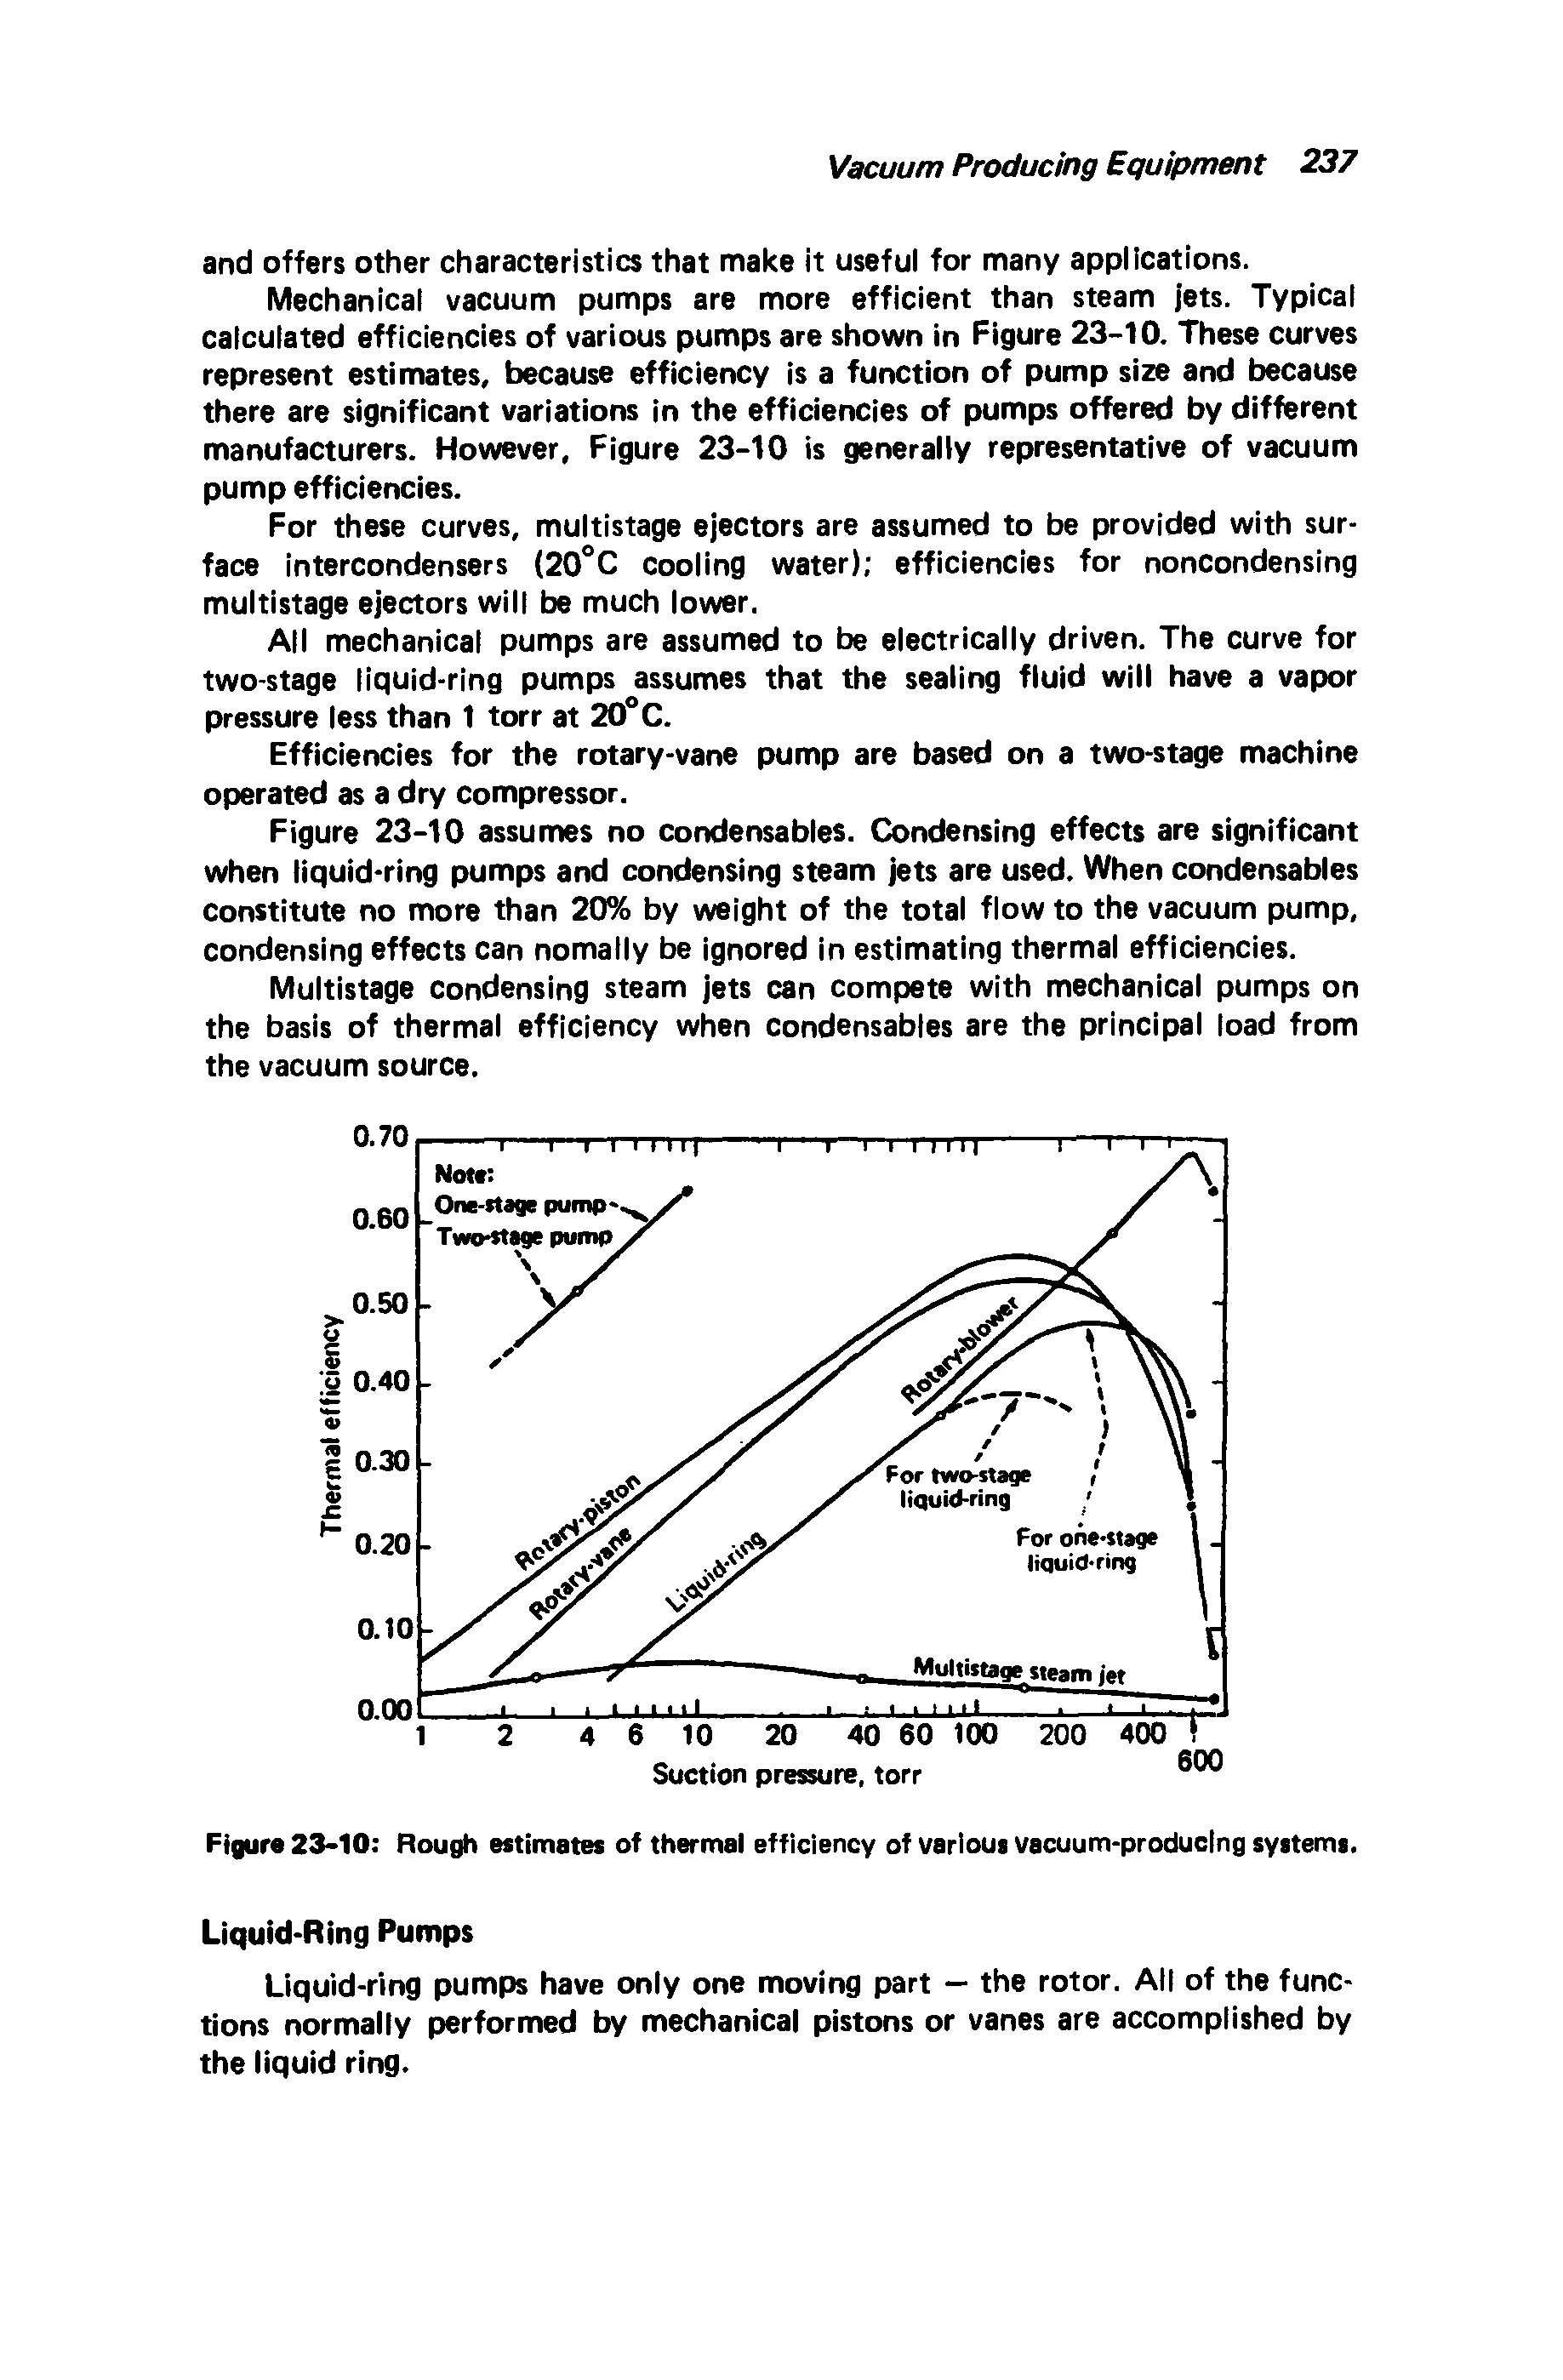 Figure 23-10 Rough estimates of thermal efficiency of various vacuum-producing systems.